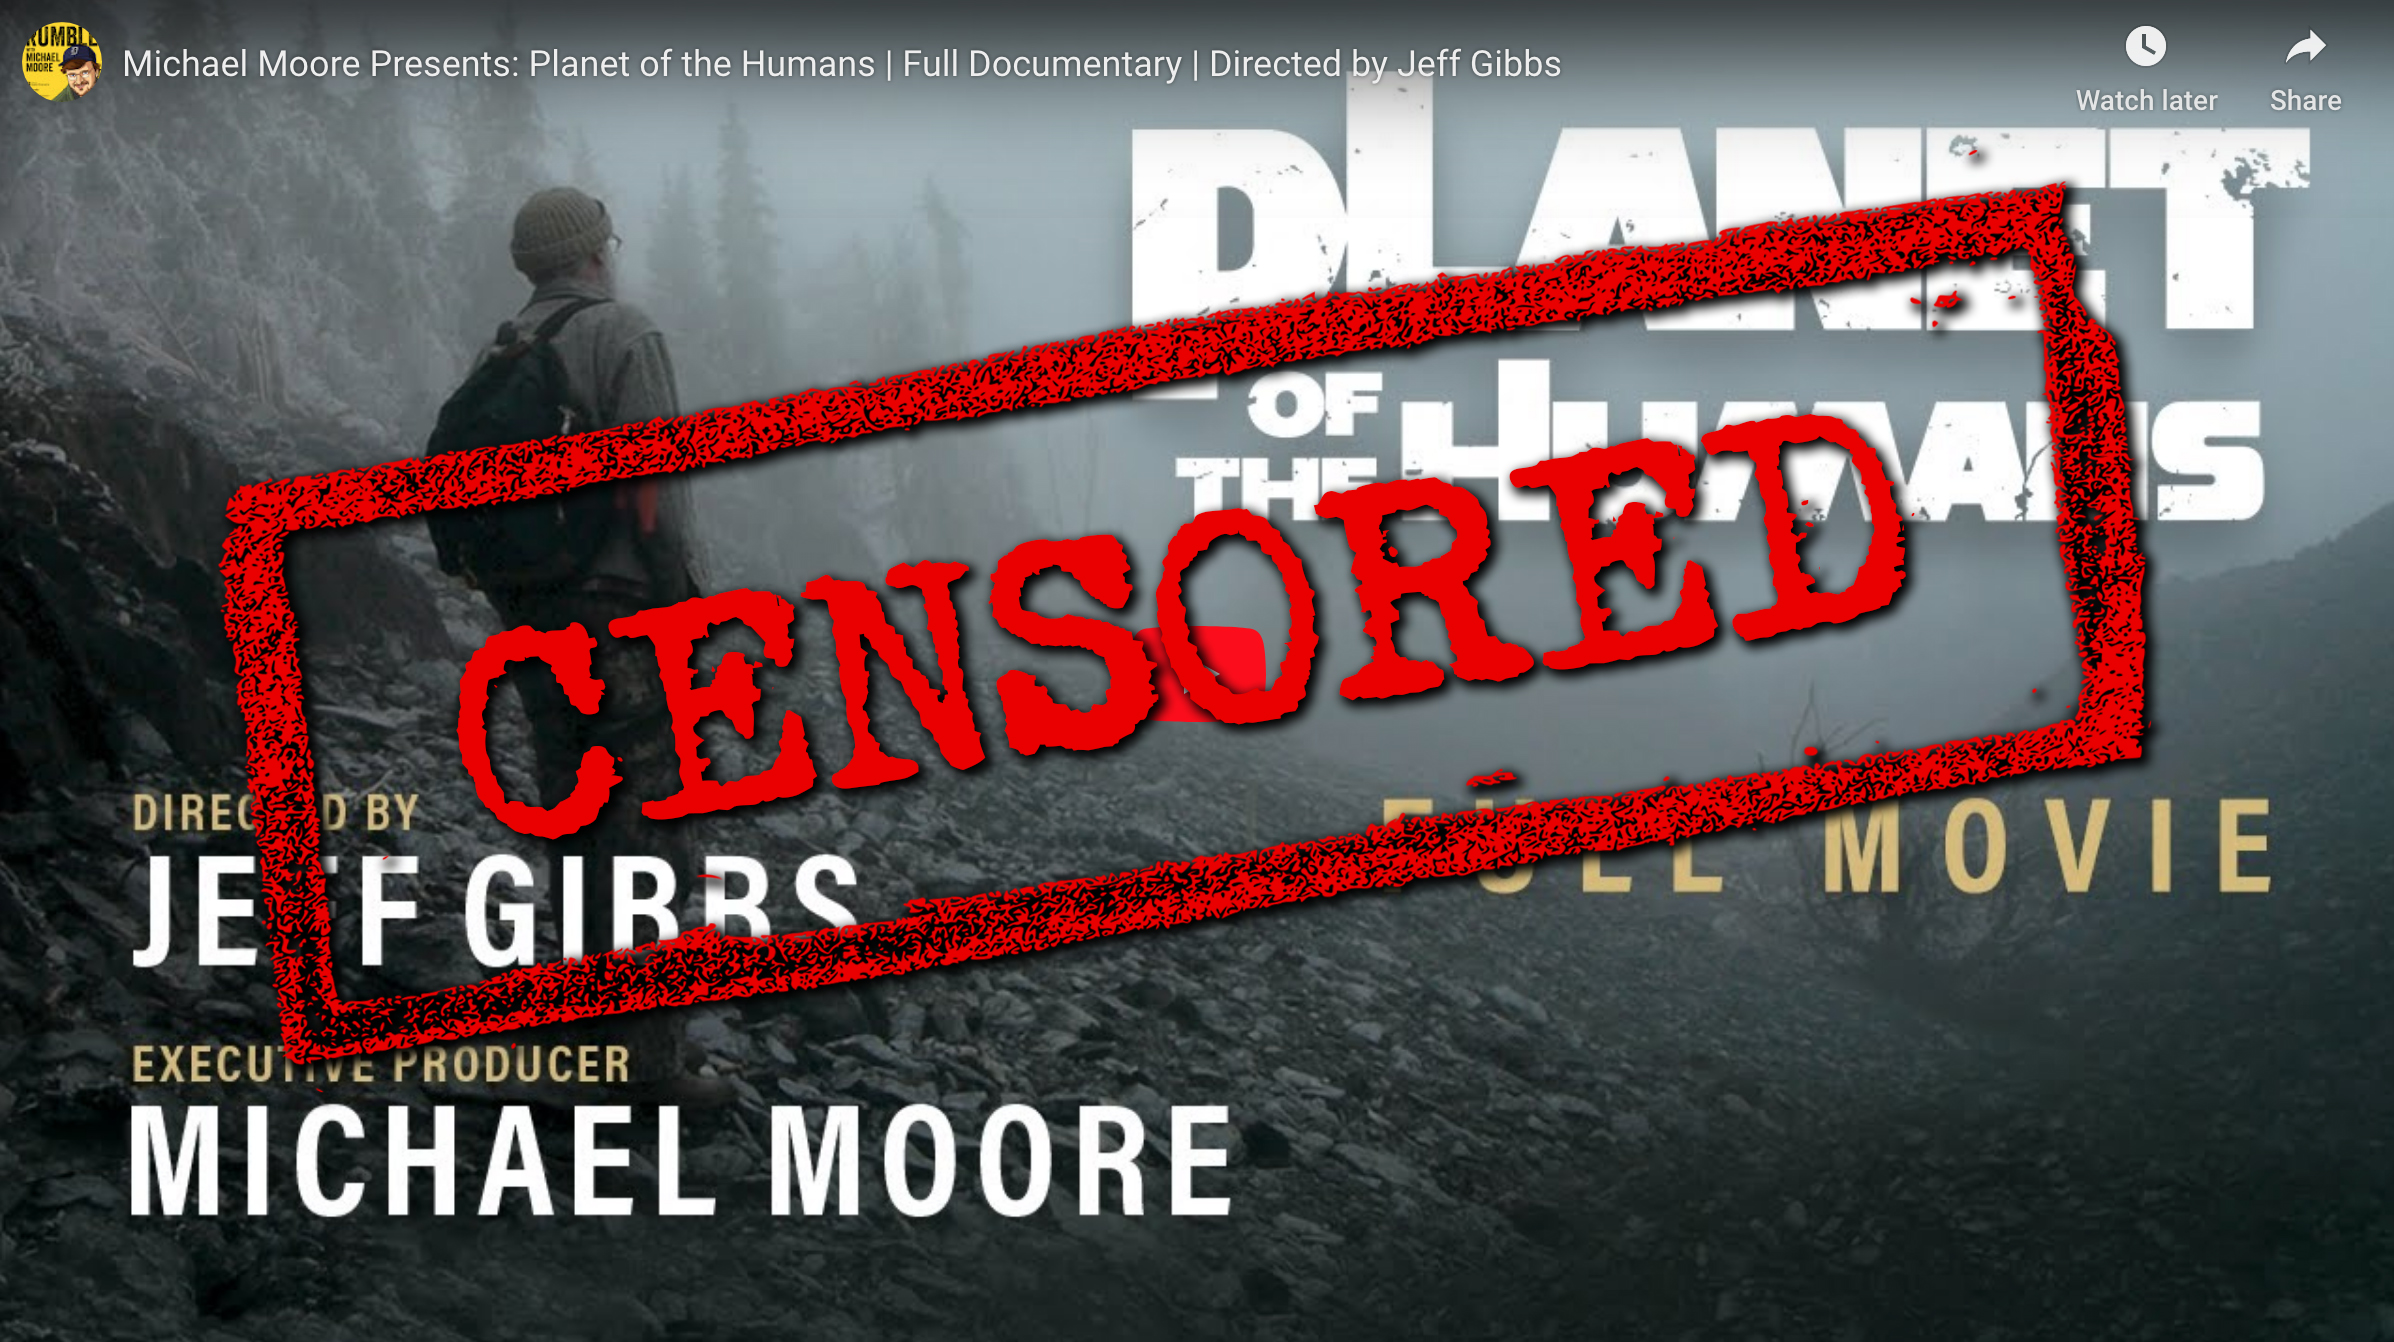 Coordinated Censorship Campaign Against Planet Of The Humans Leads To It  Being Taken Down From YouTube Where It Had Been Viewed 8.3 Million Times - Planet  of the Humans